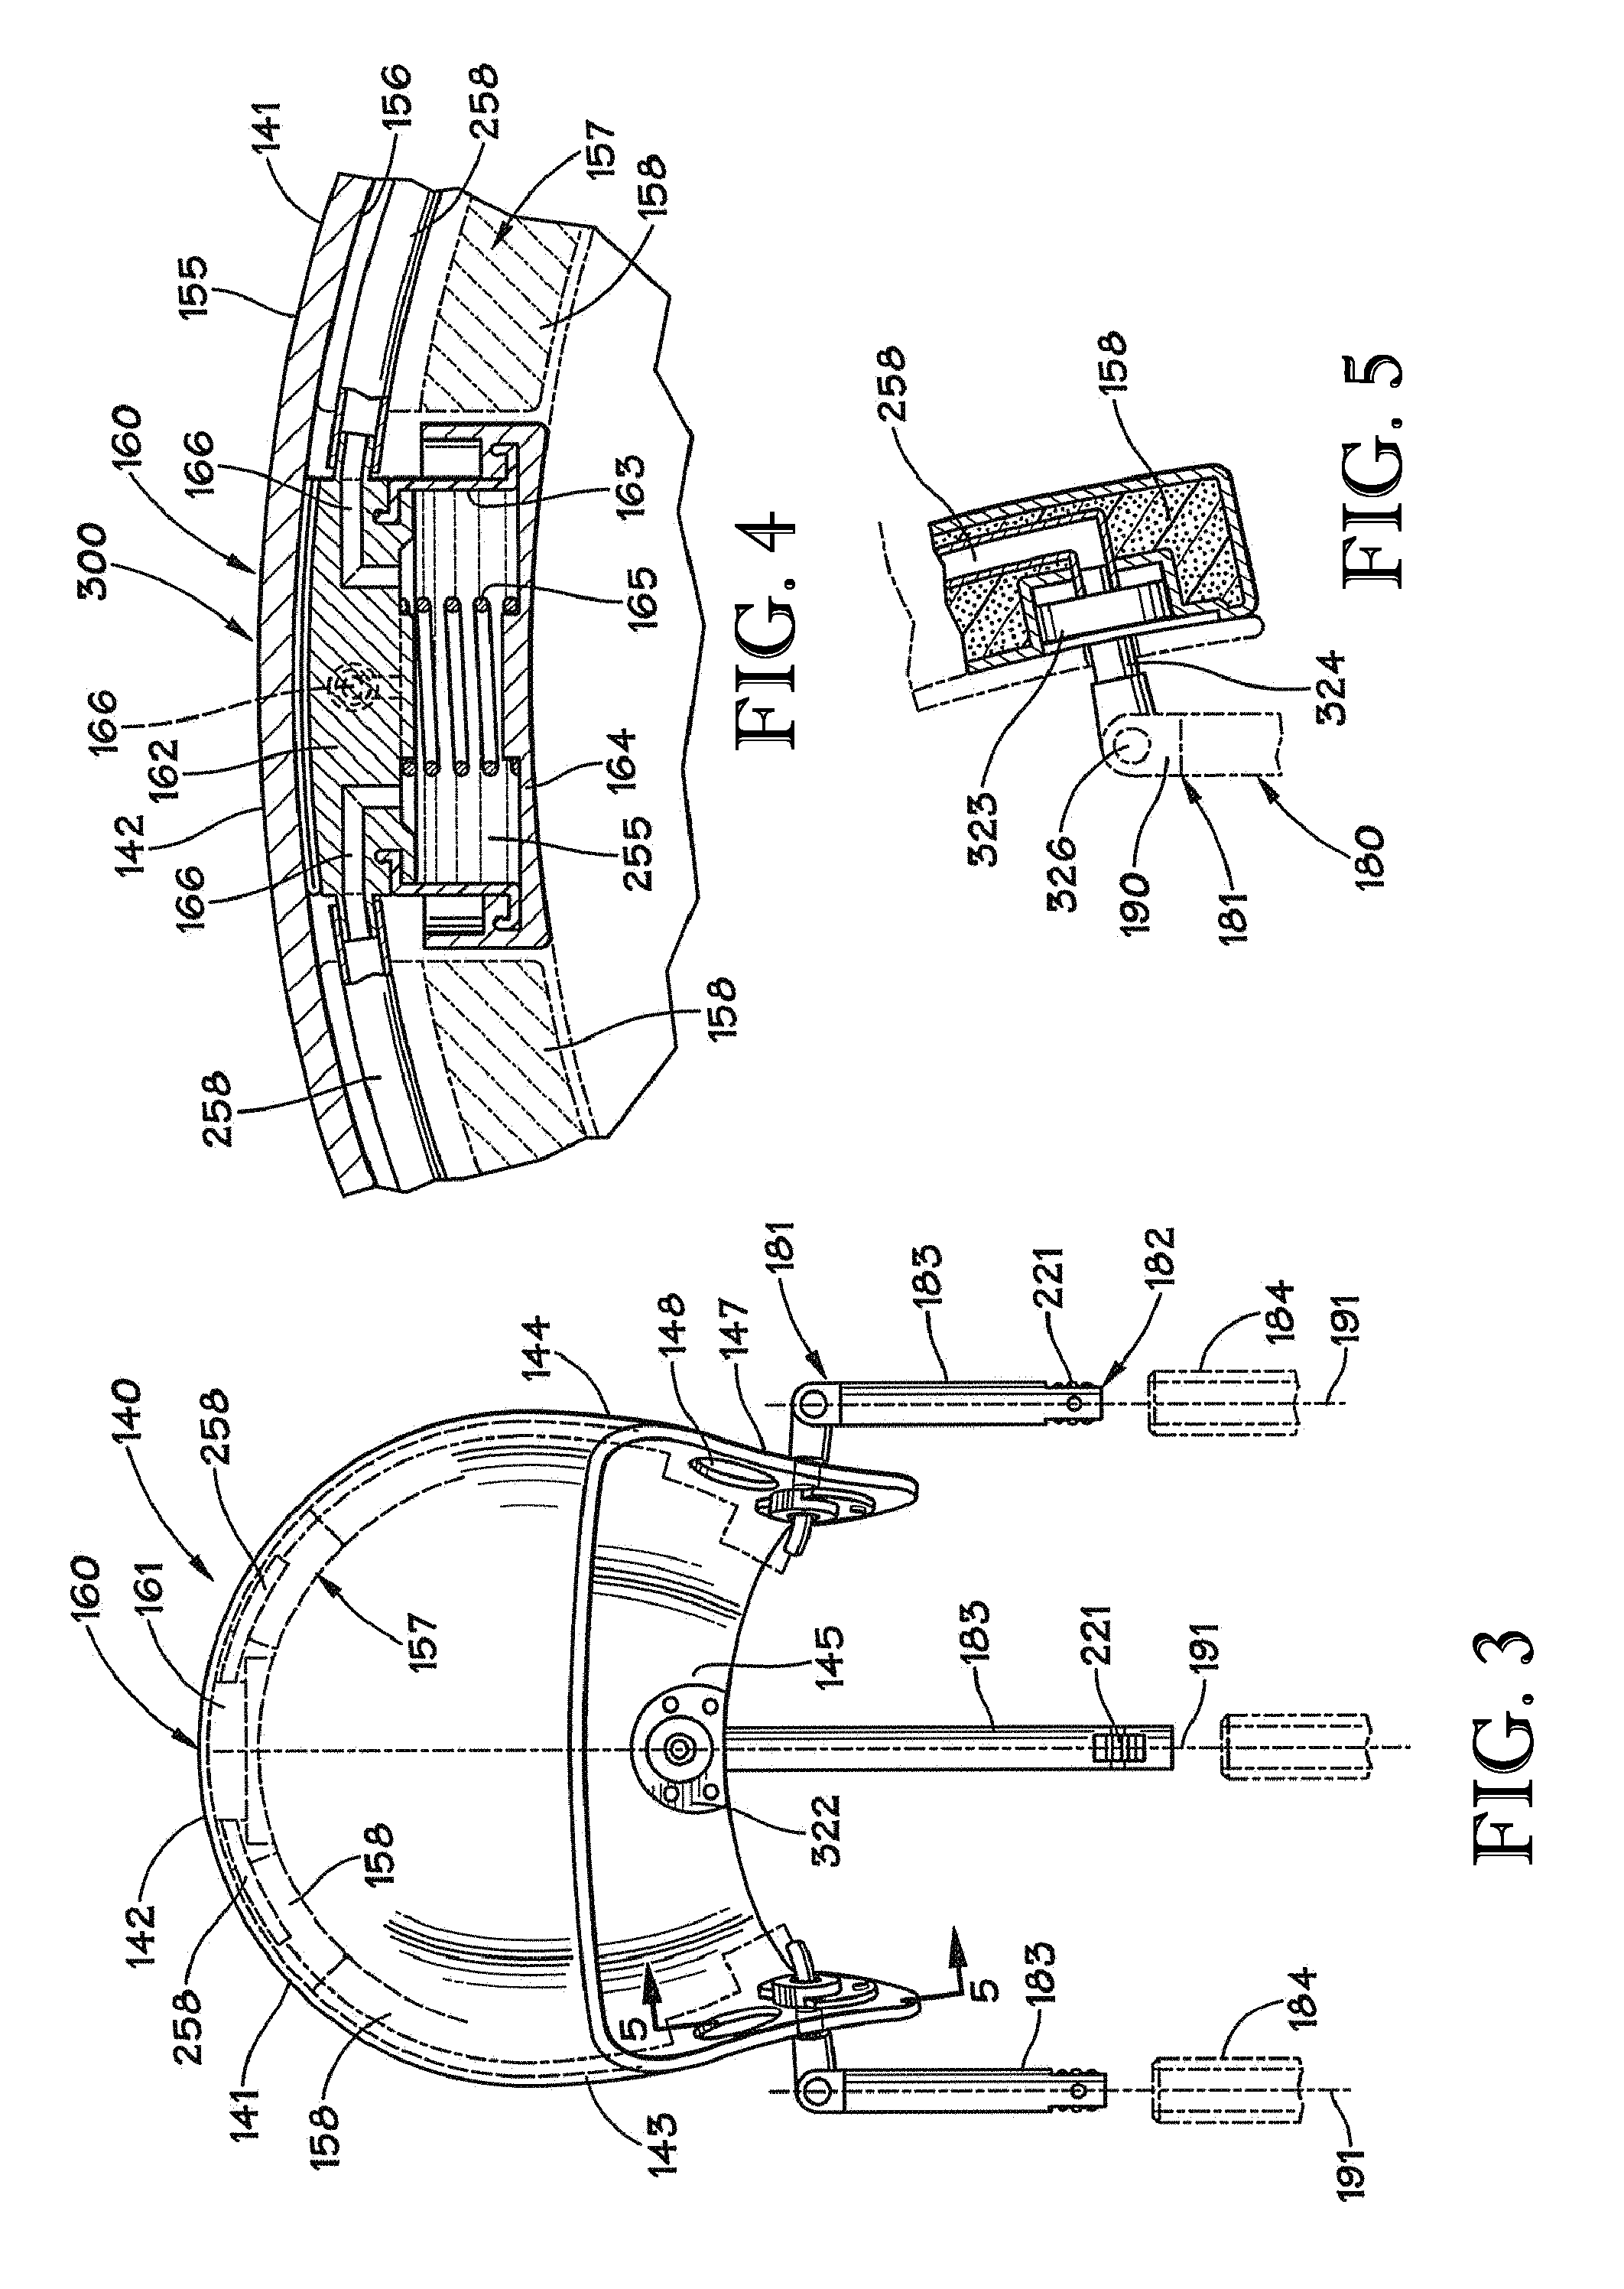 Energy dissipating breakaway assembly for protective helmet